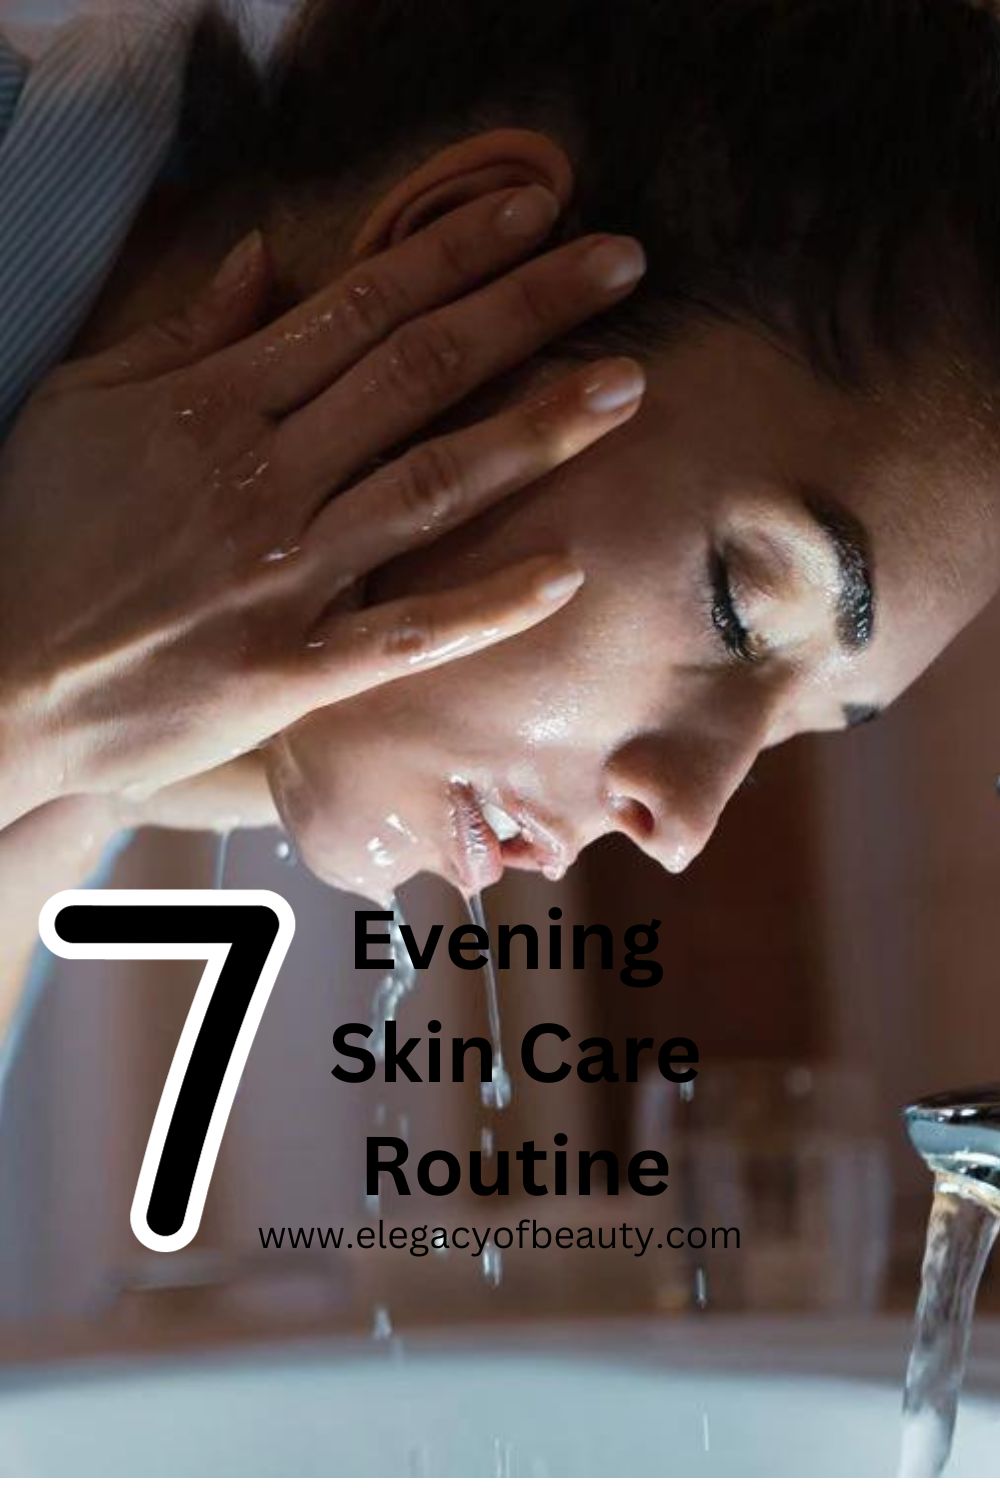 Evening Skin Care Routine